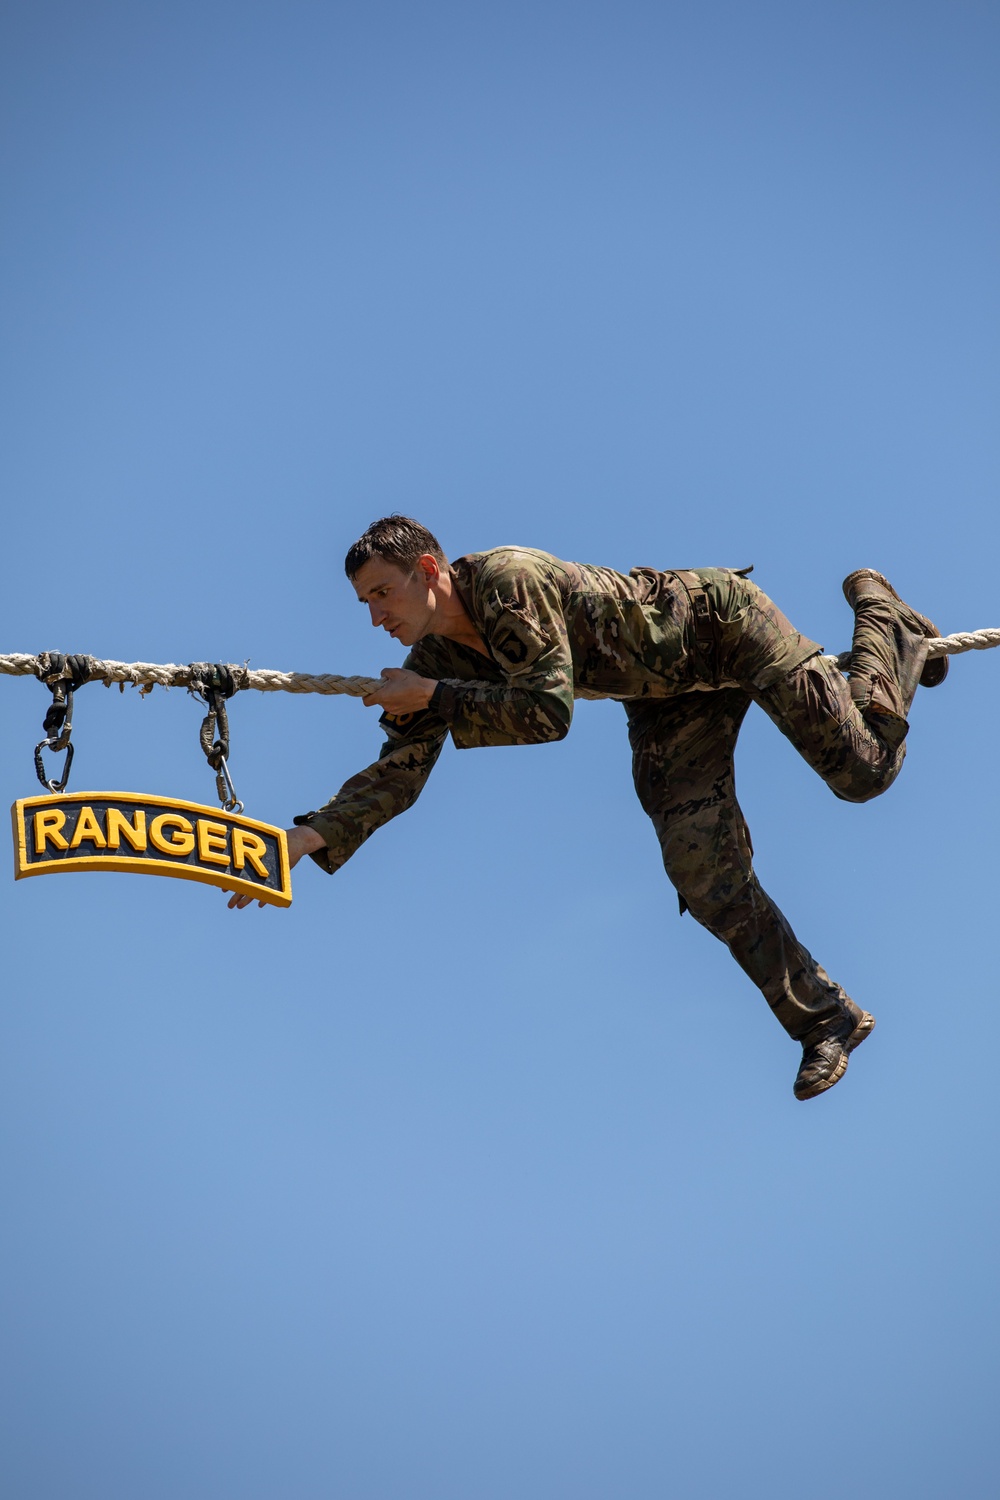 Best Ranger Competition 2024